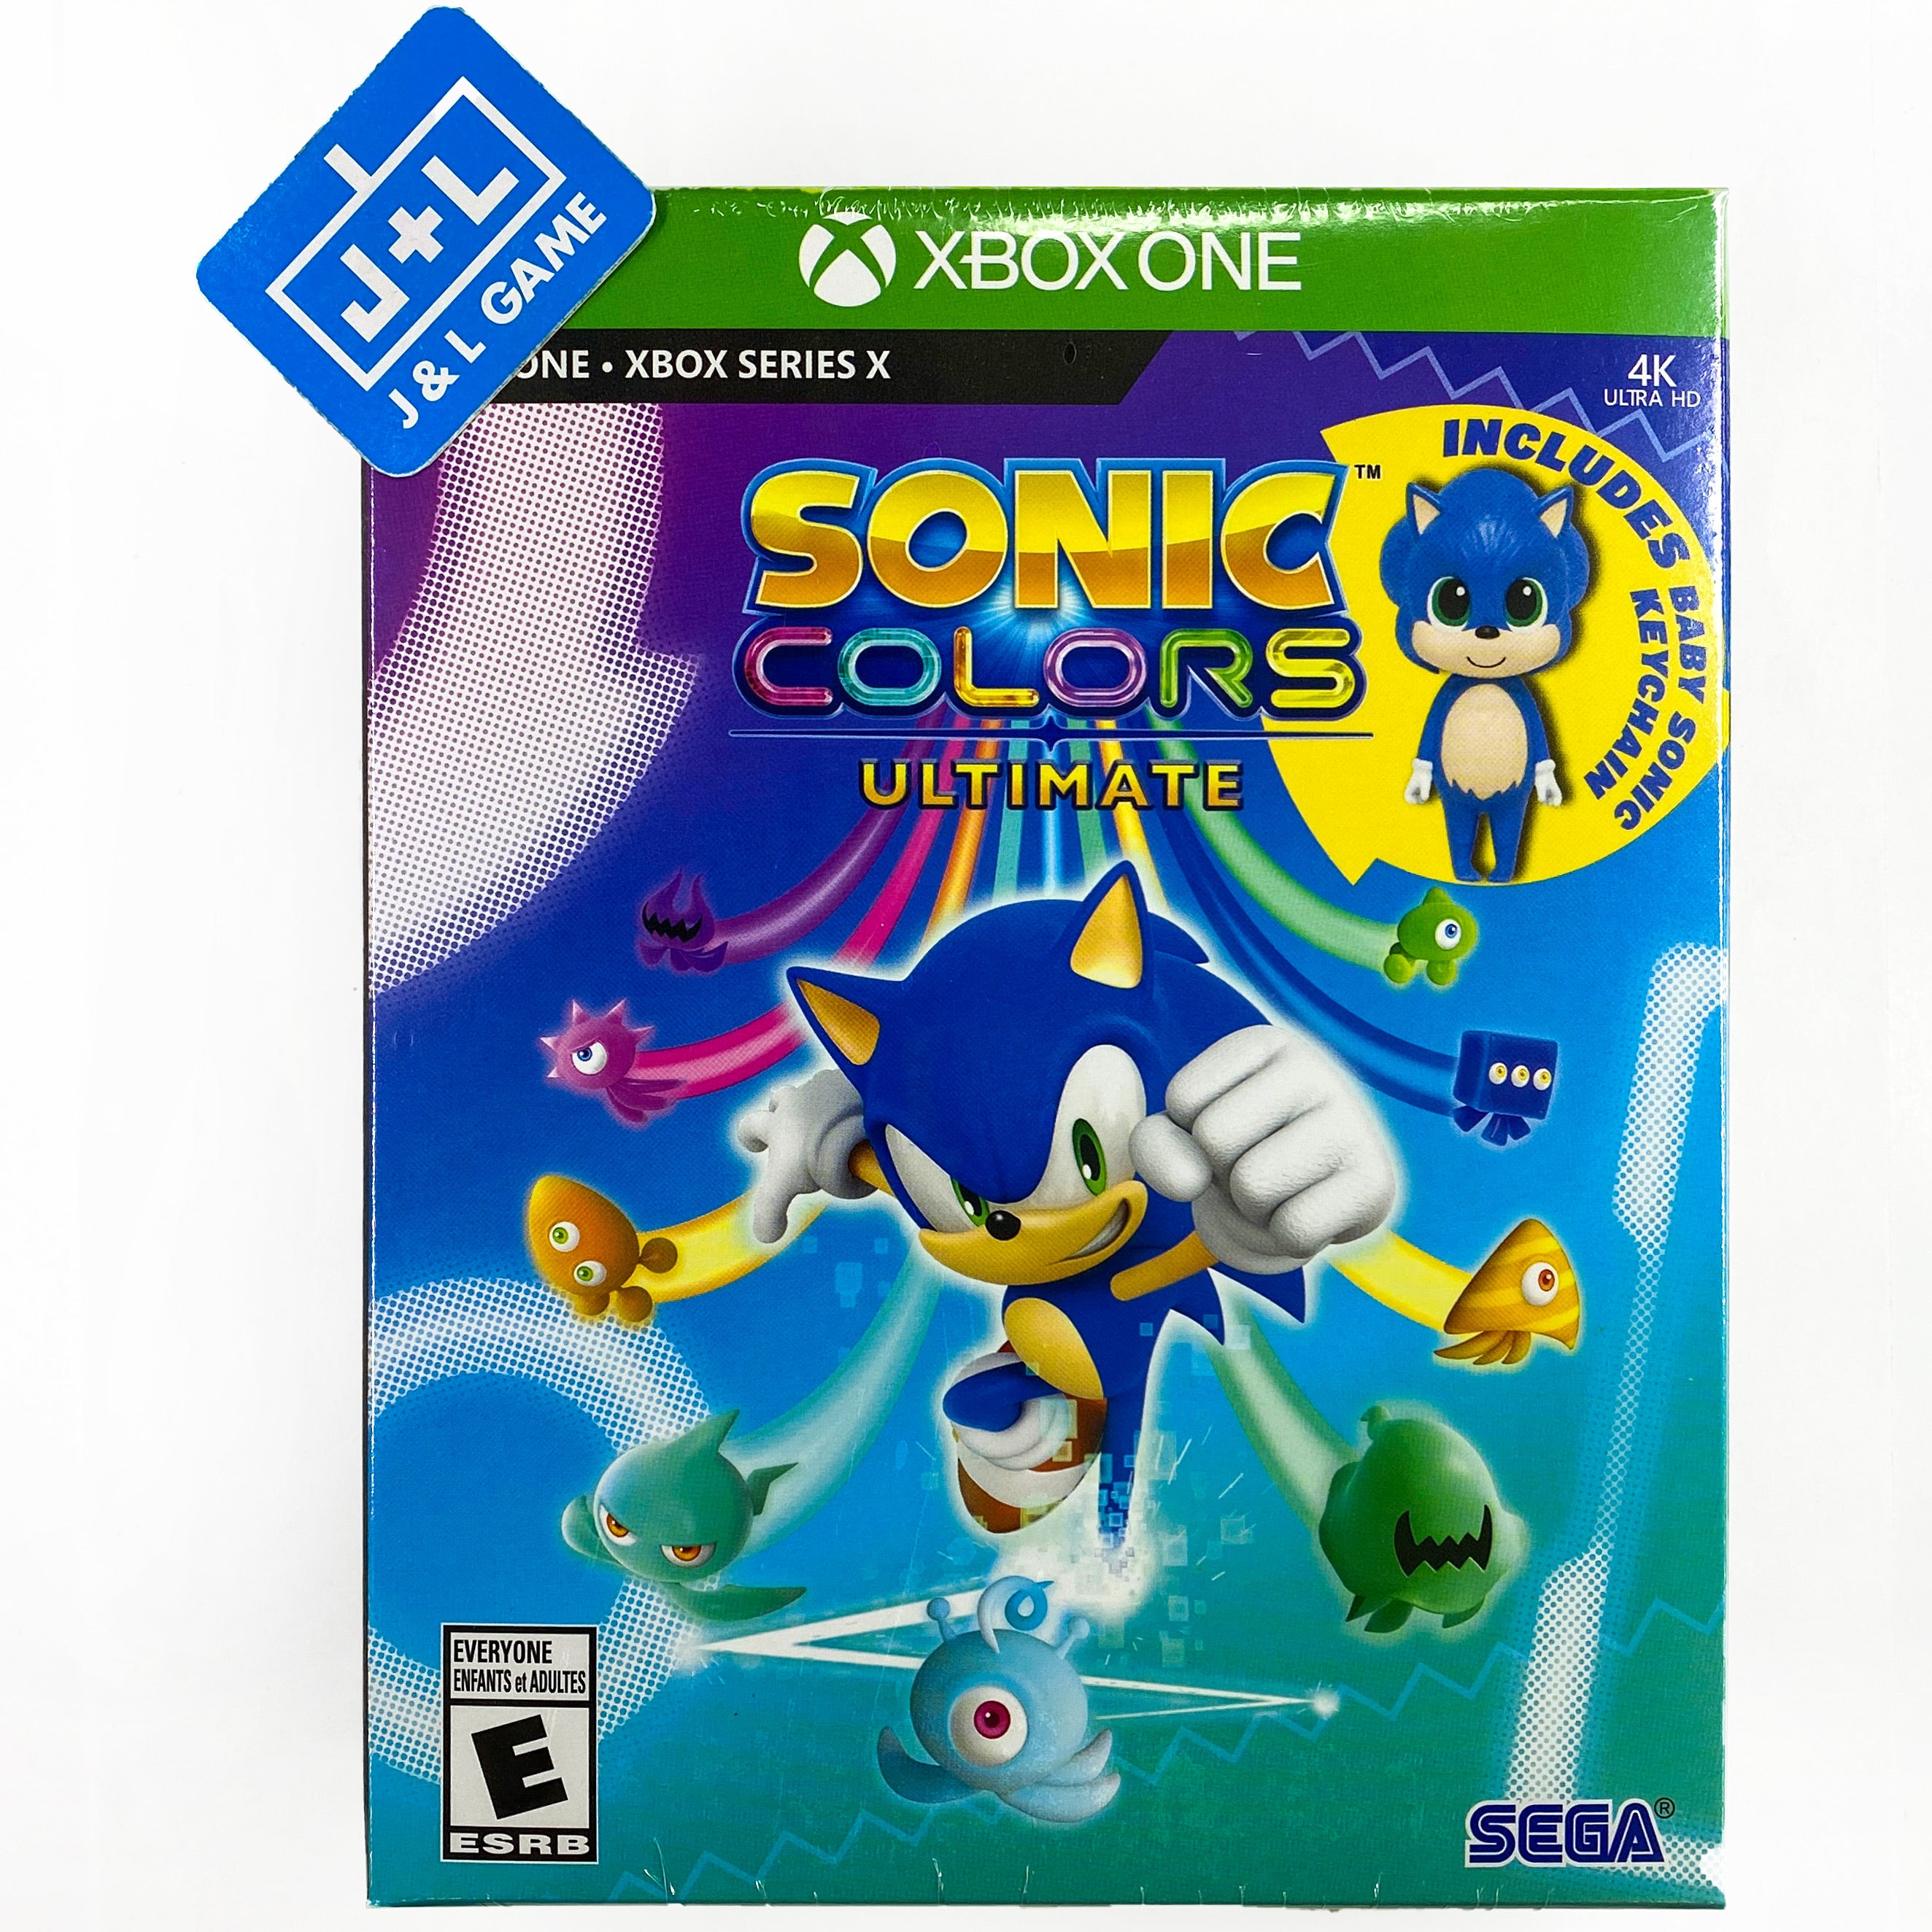 Sonic Colors Ultimate: Launch Edition - (XB1) Xbox One Video Games SEGA   